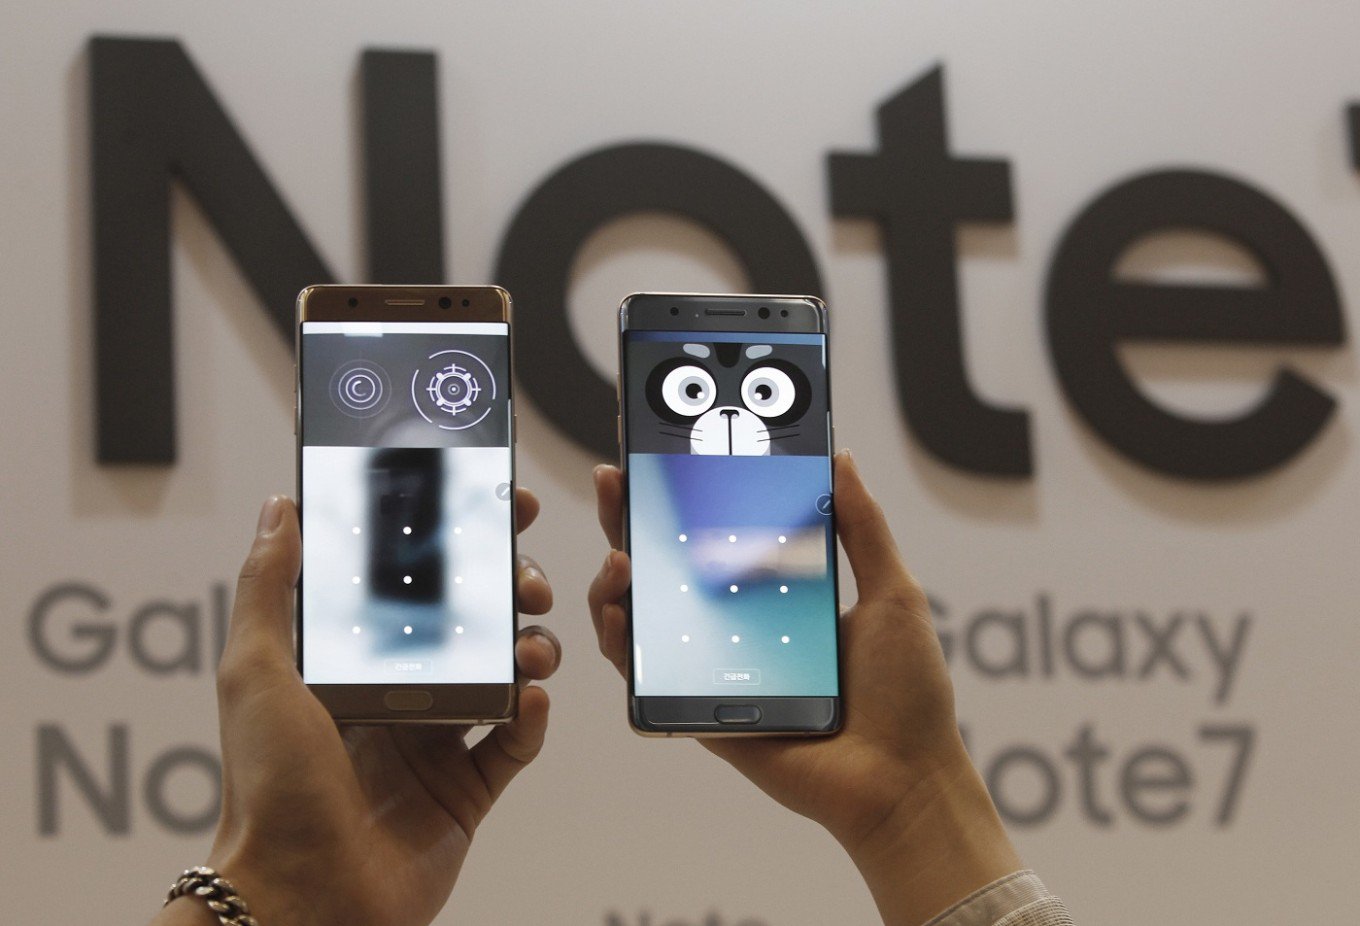 Samsung stopped Note 7's production